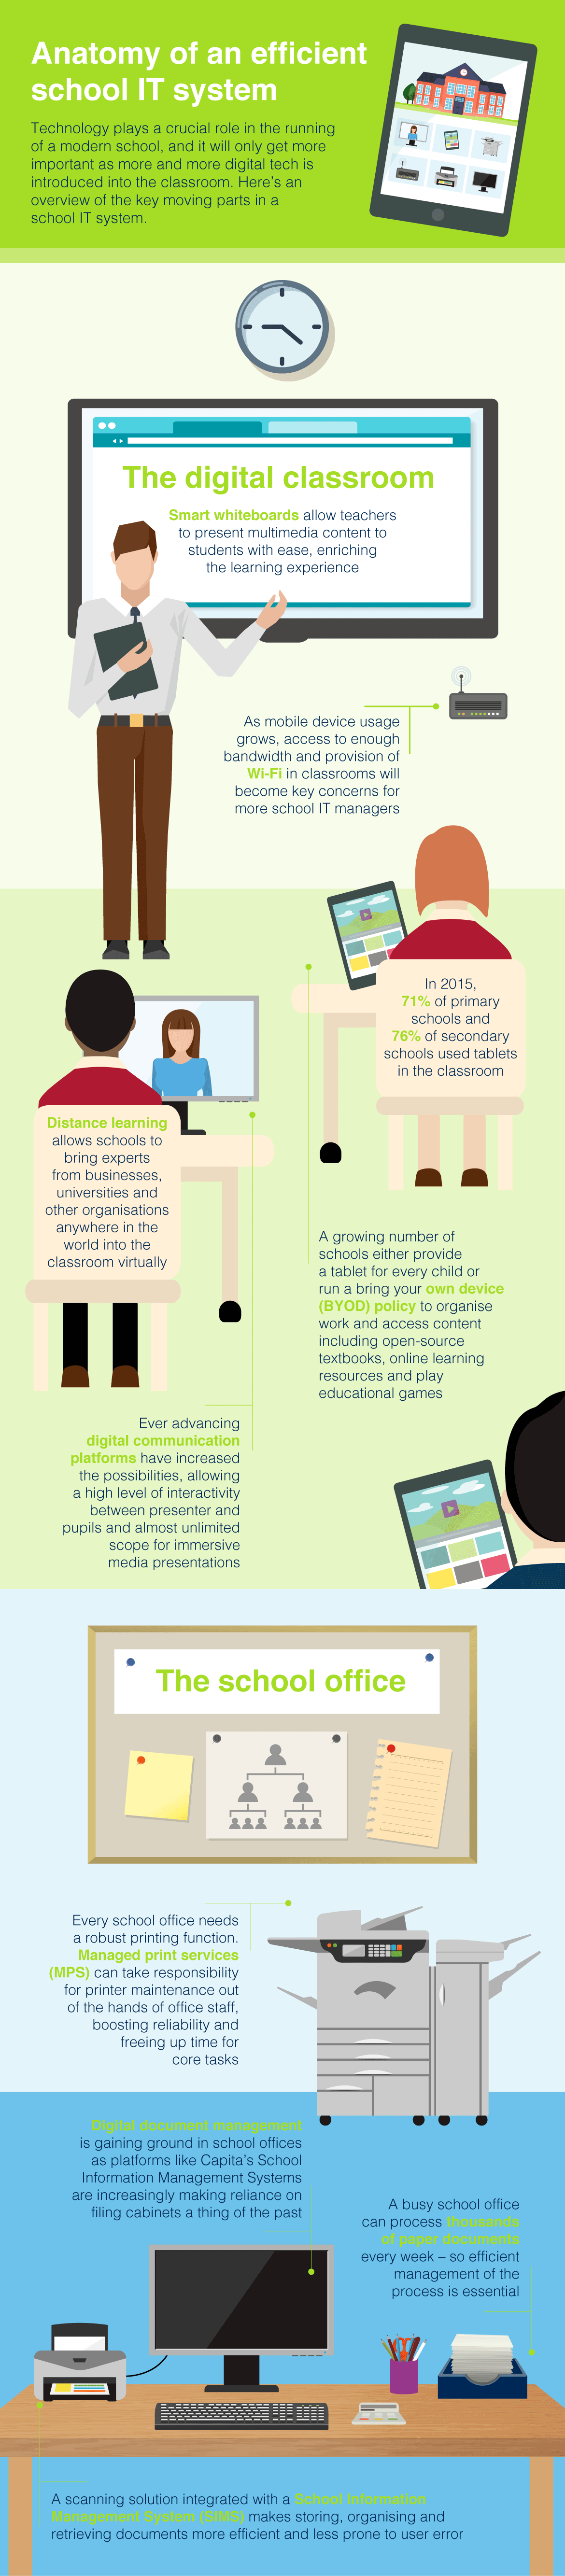 Brother education infographic showing the anatomy of a connected classroom